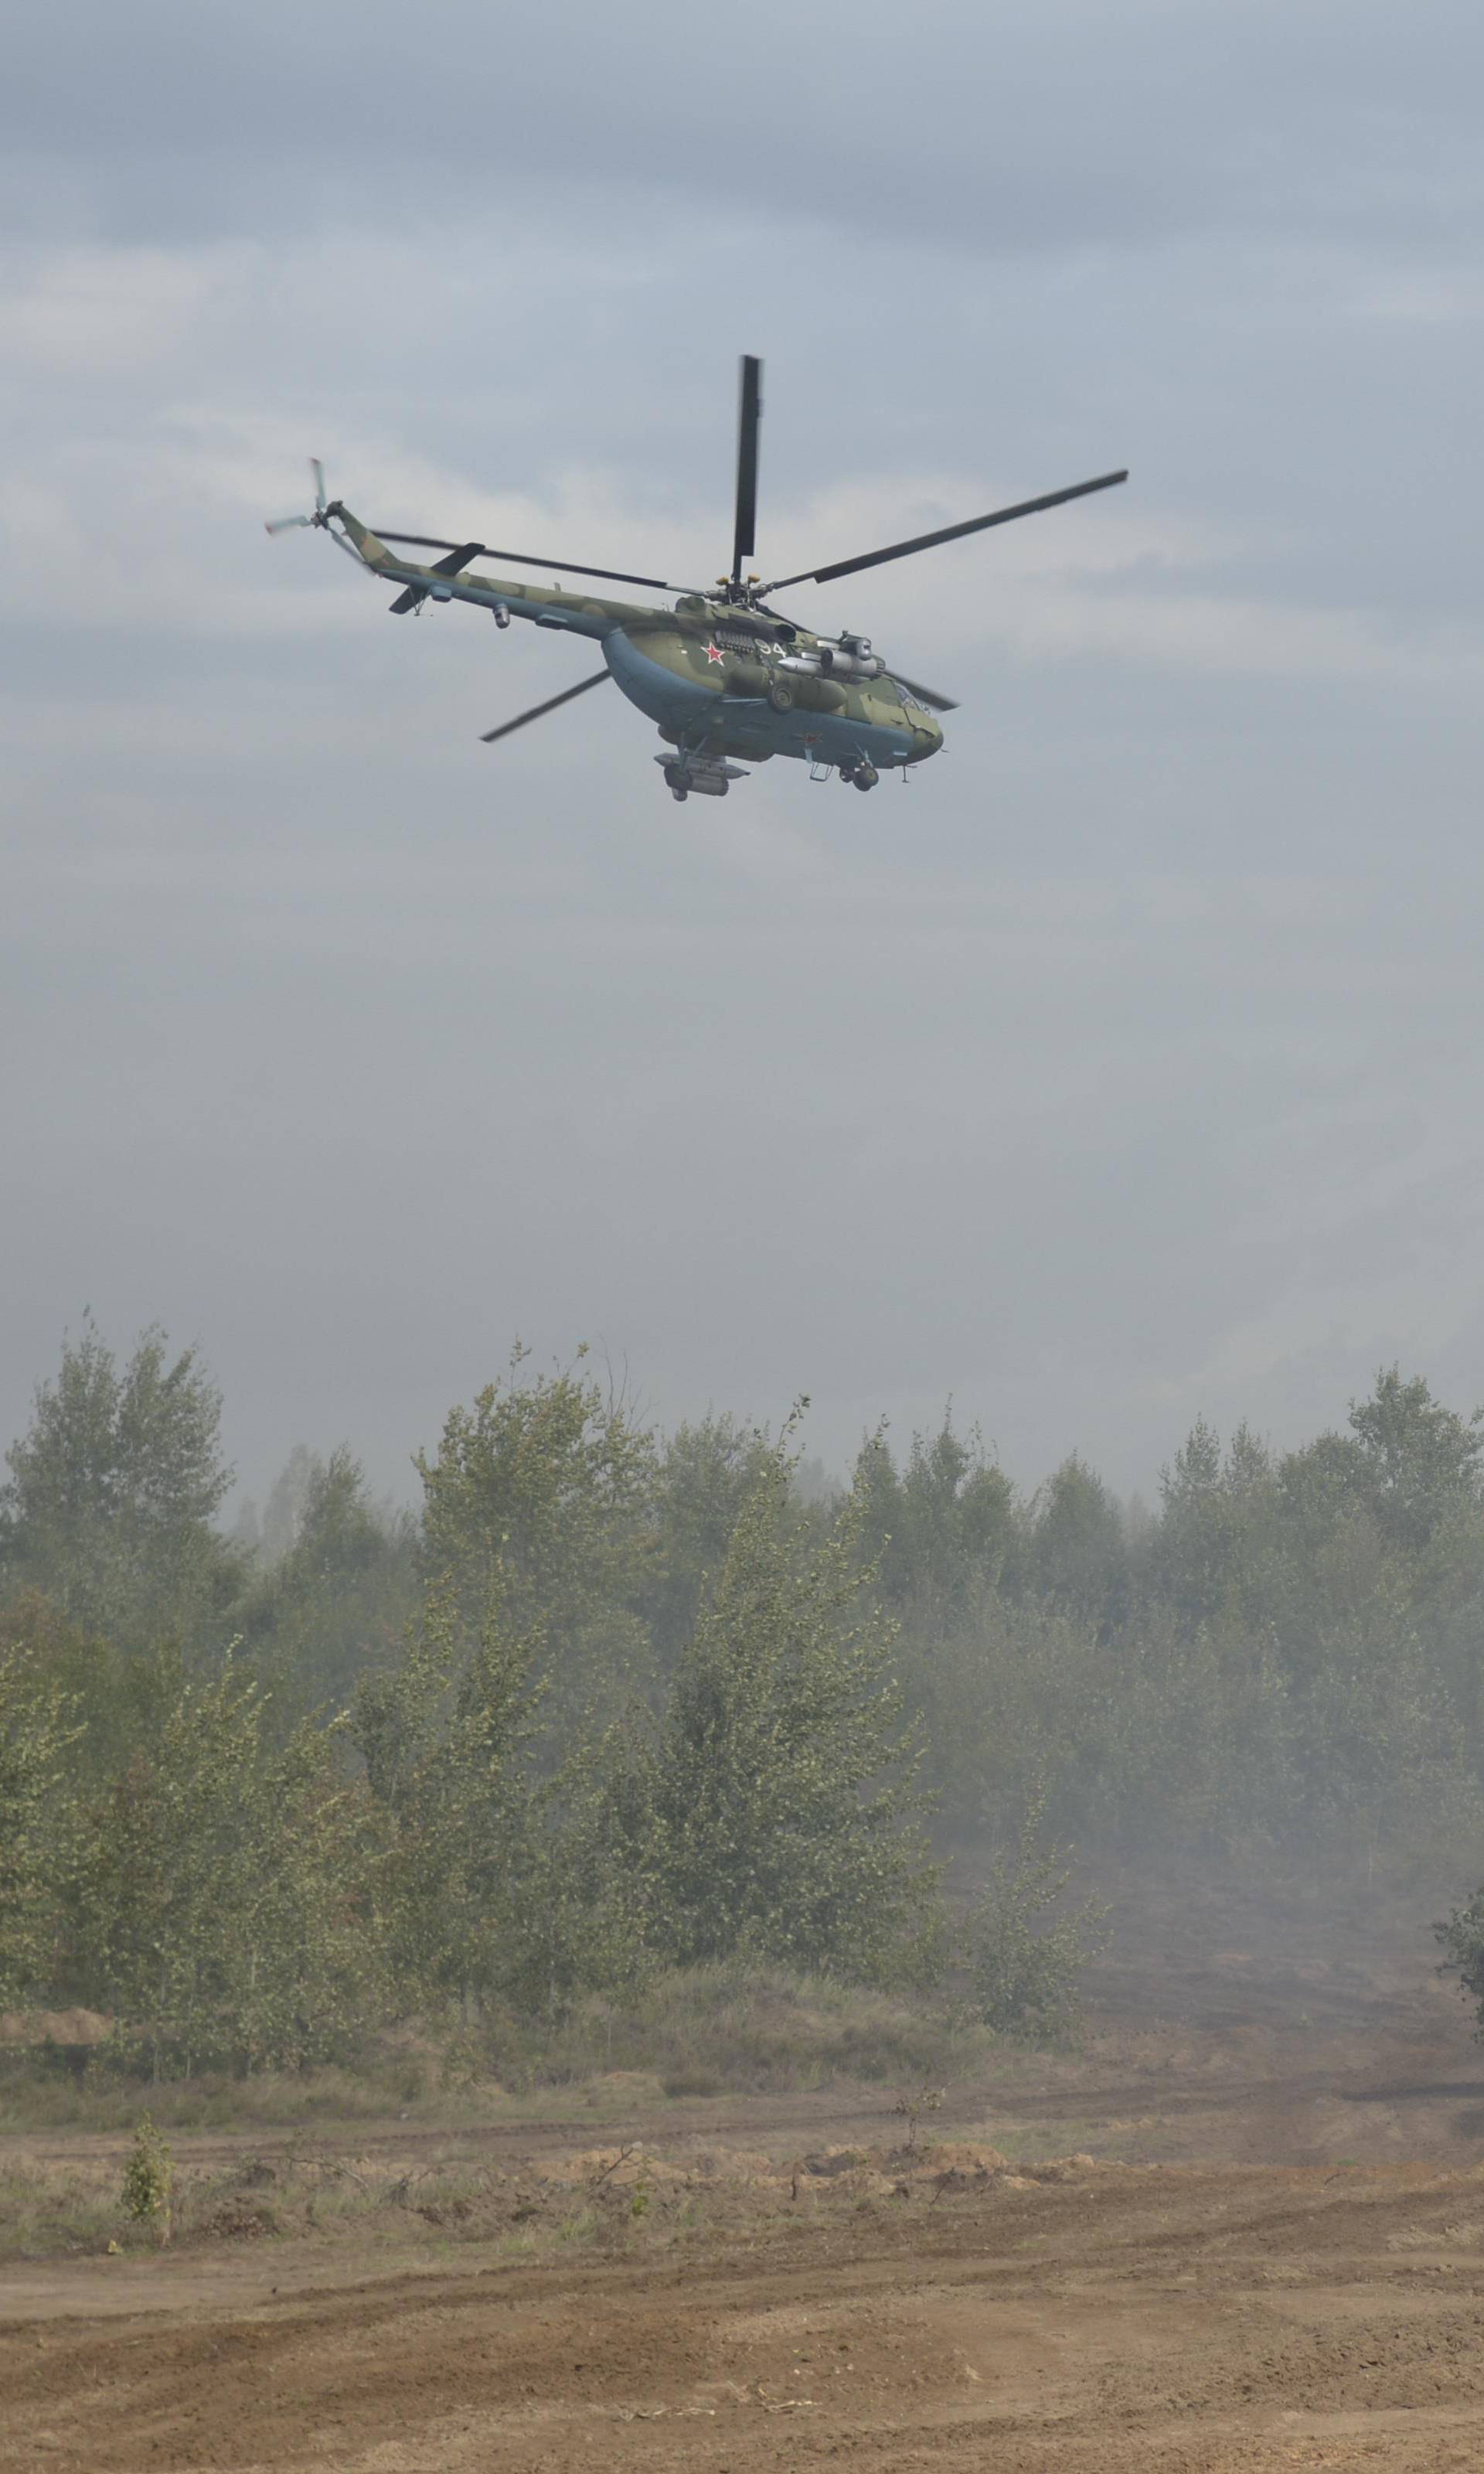 Helicopters and an armoured vehicle are seen during the Zapad-2017 war games in Belarus